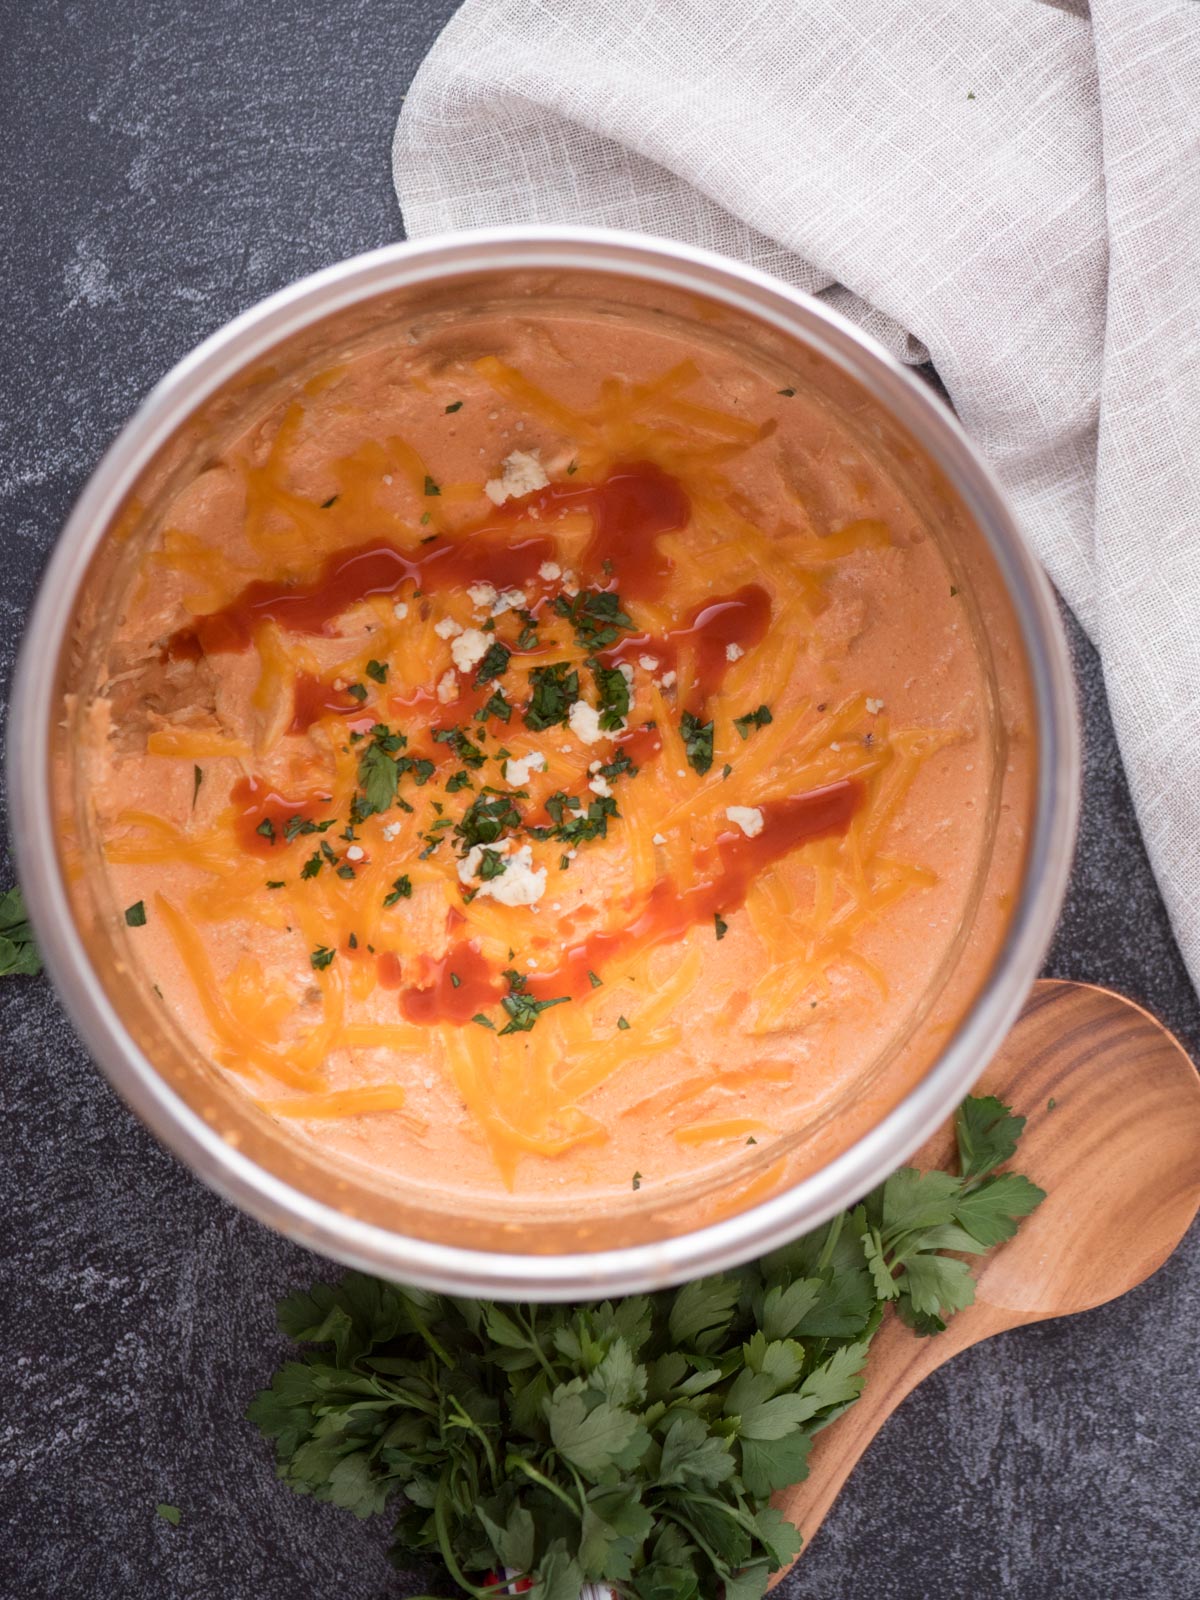 Wooden spoon resting next to a bowl of buffalo chicken dip with chopped cilantro and cheese crumbles over the top.